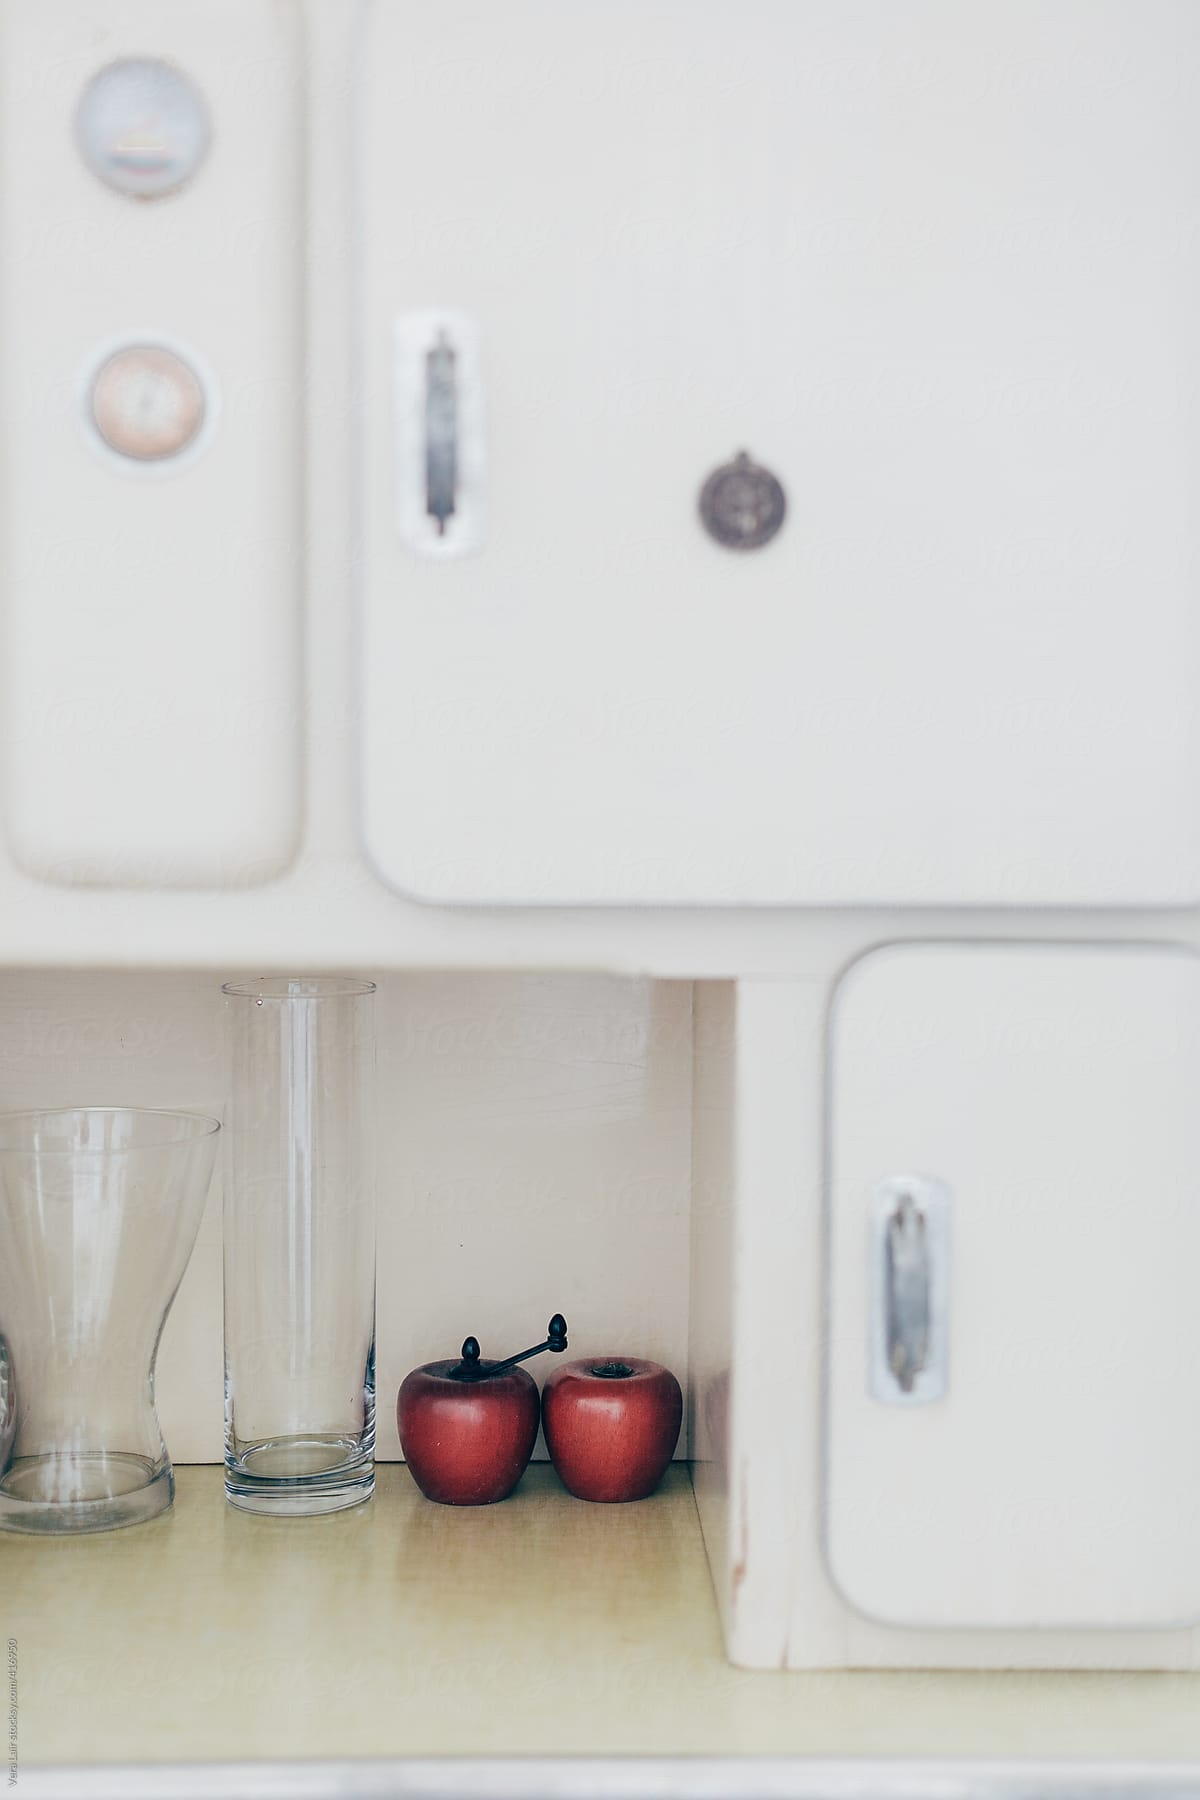 Two red apples in a kitchen cabinet